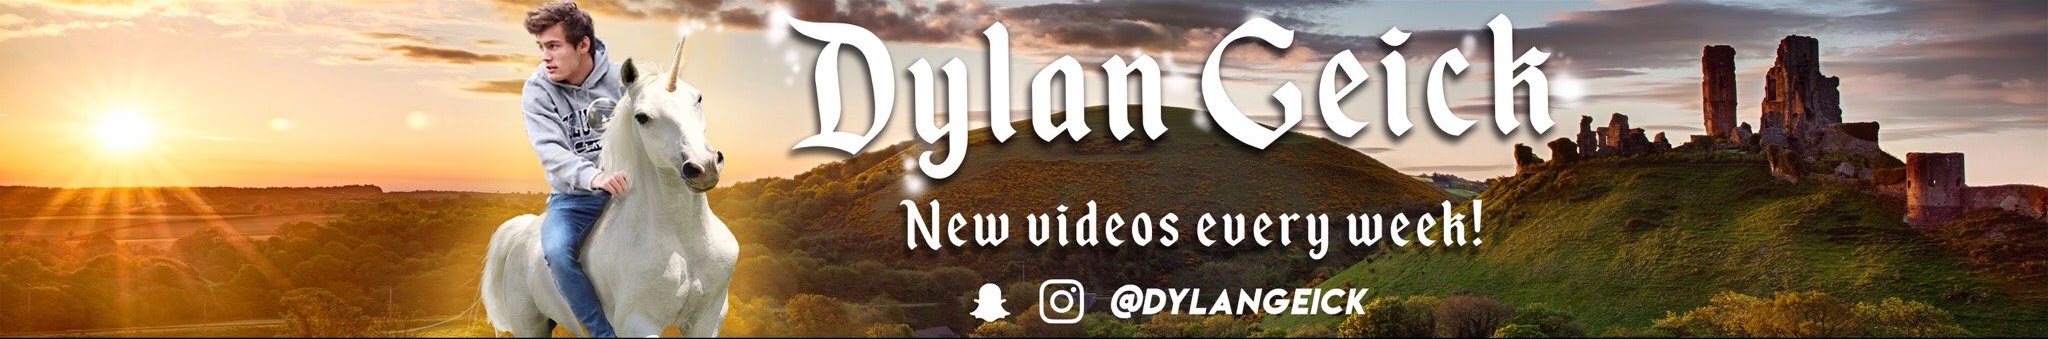 Dylan Geick - YouTube